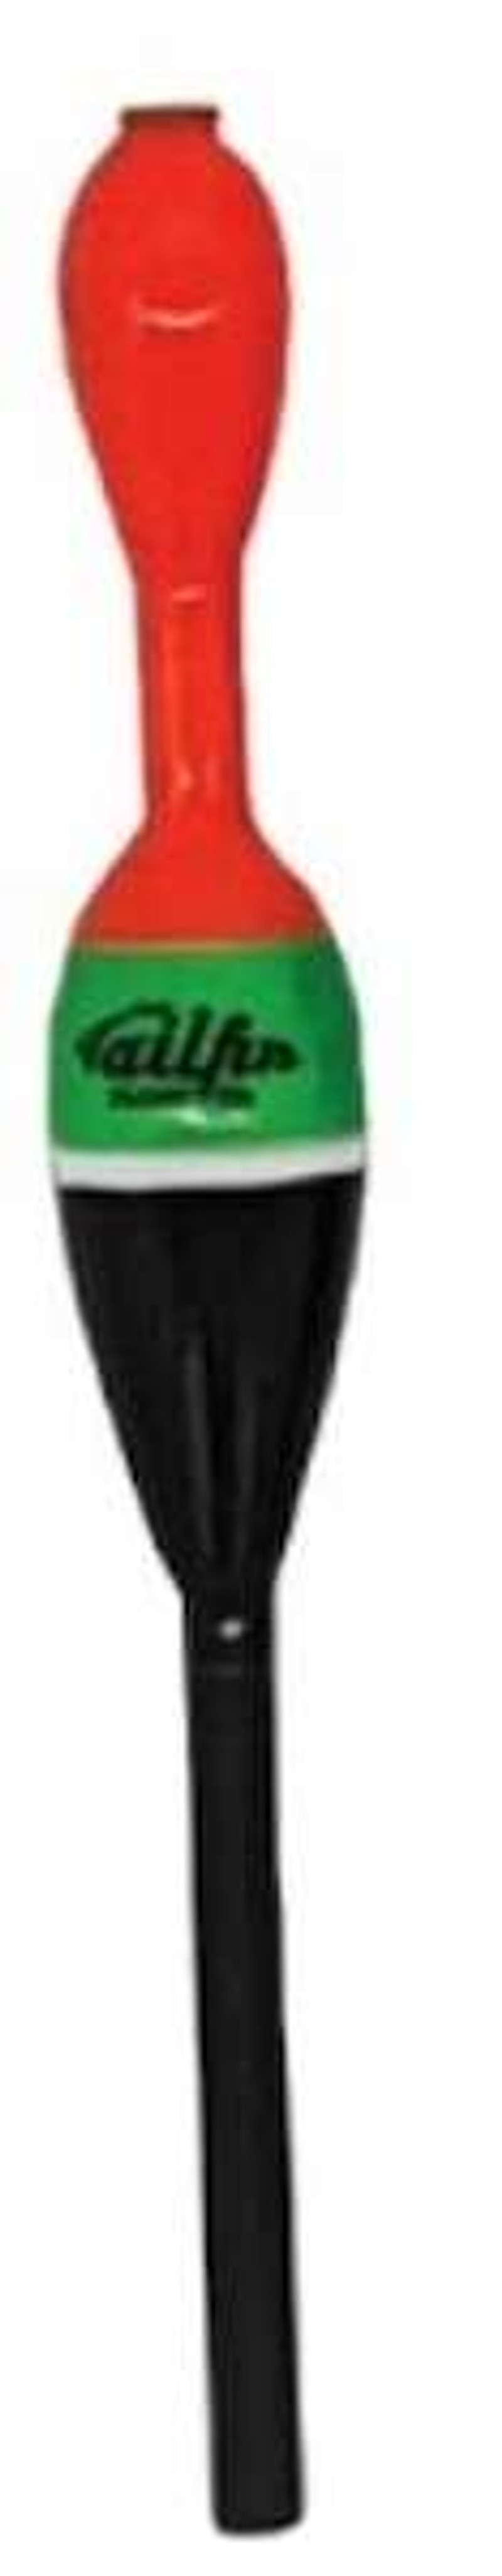 Tailfin Premium Slip Float - Weighted - 3/4 Oval 